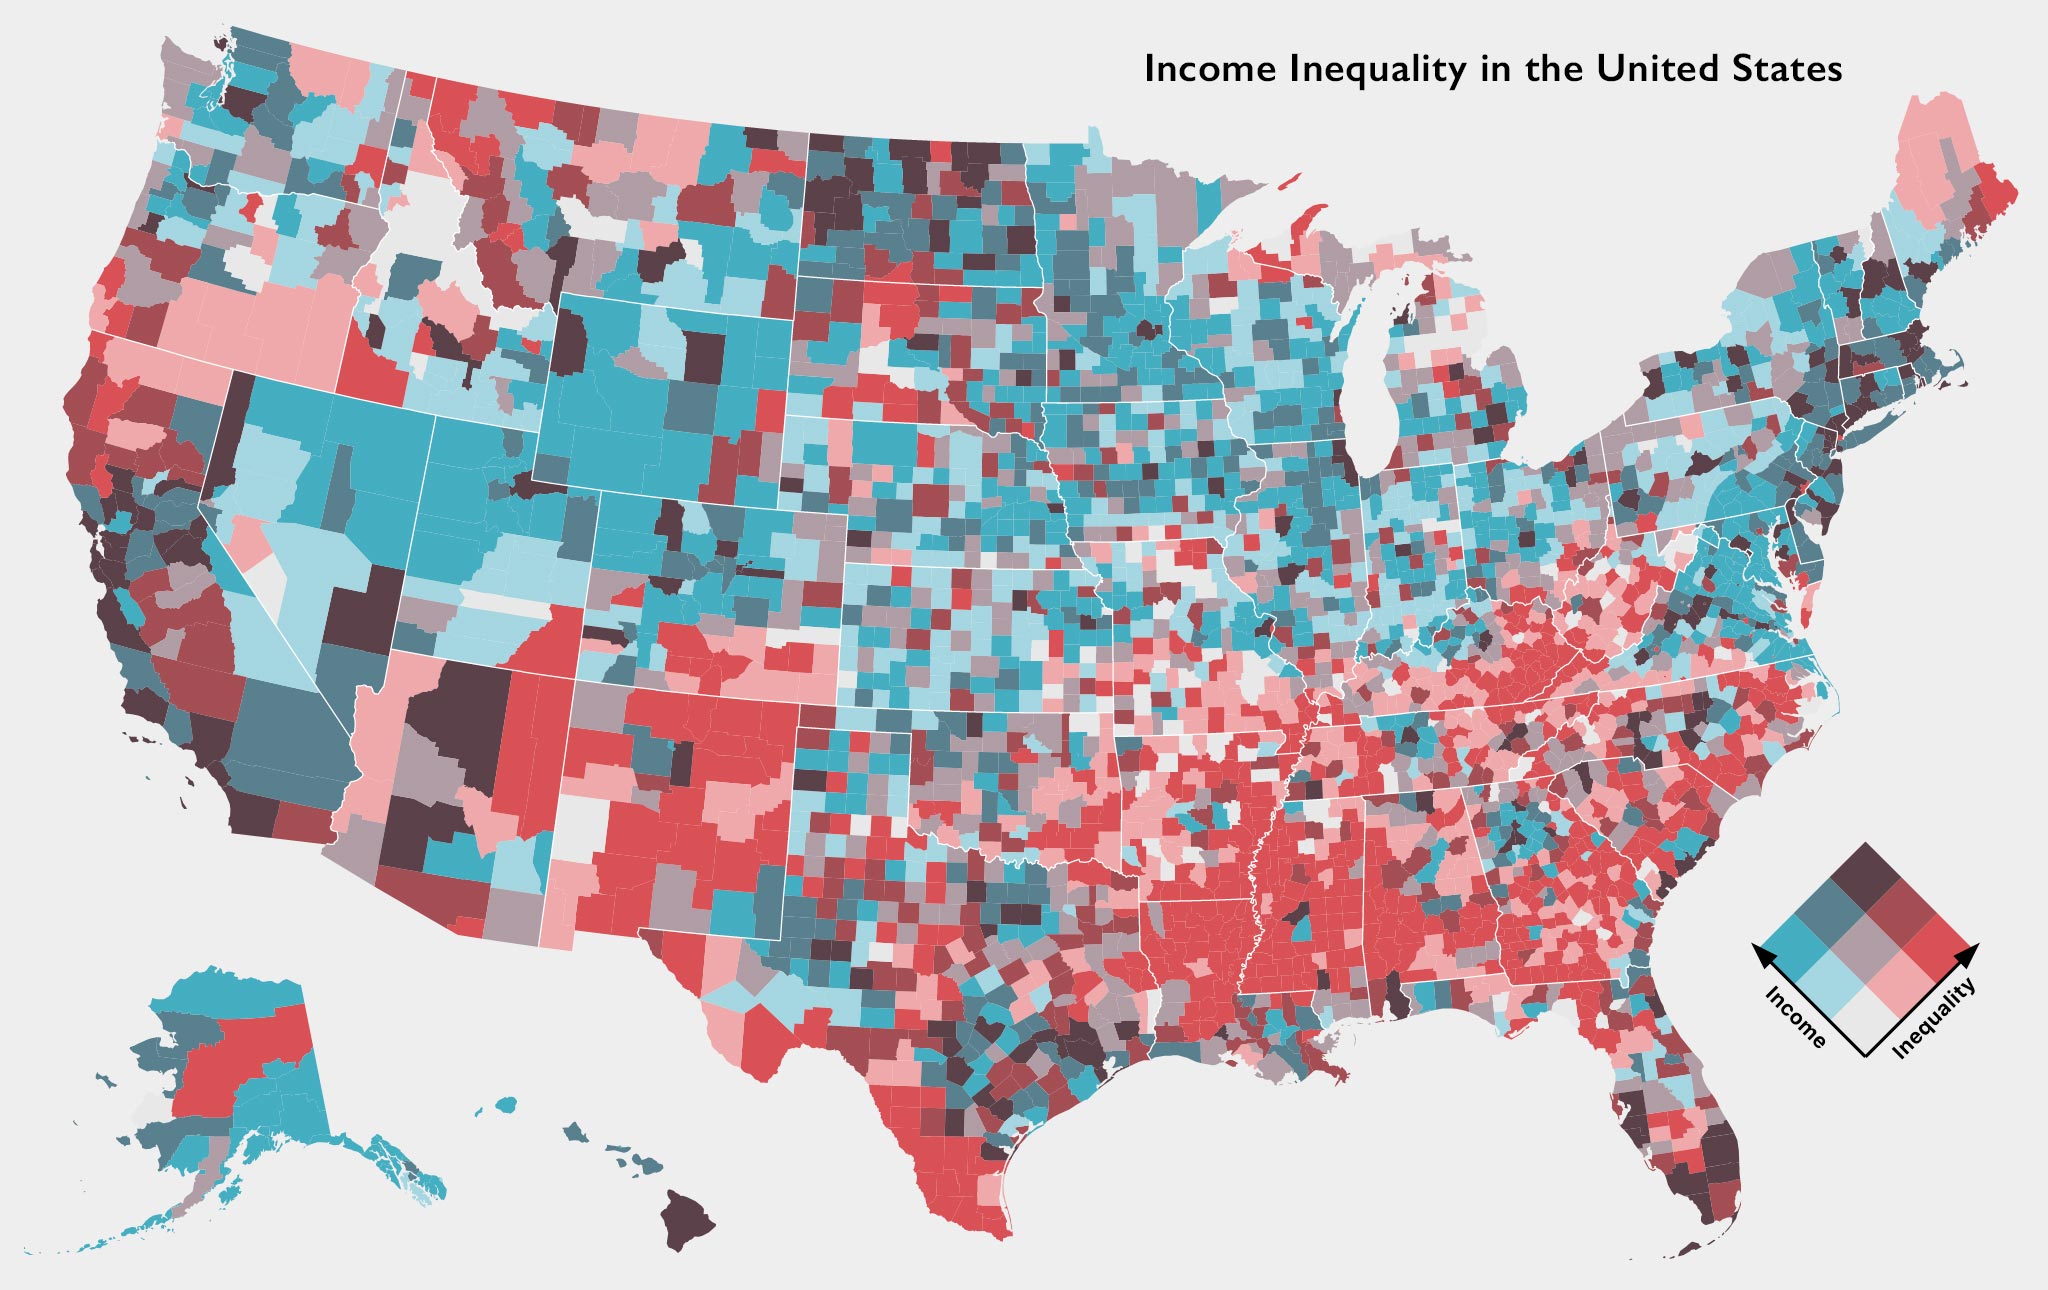 Bivariate choropleth map showing levels of income and income inequality in the United States, by county.